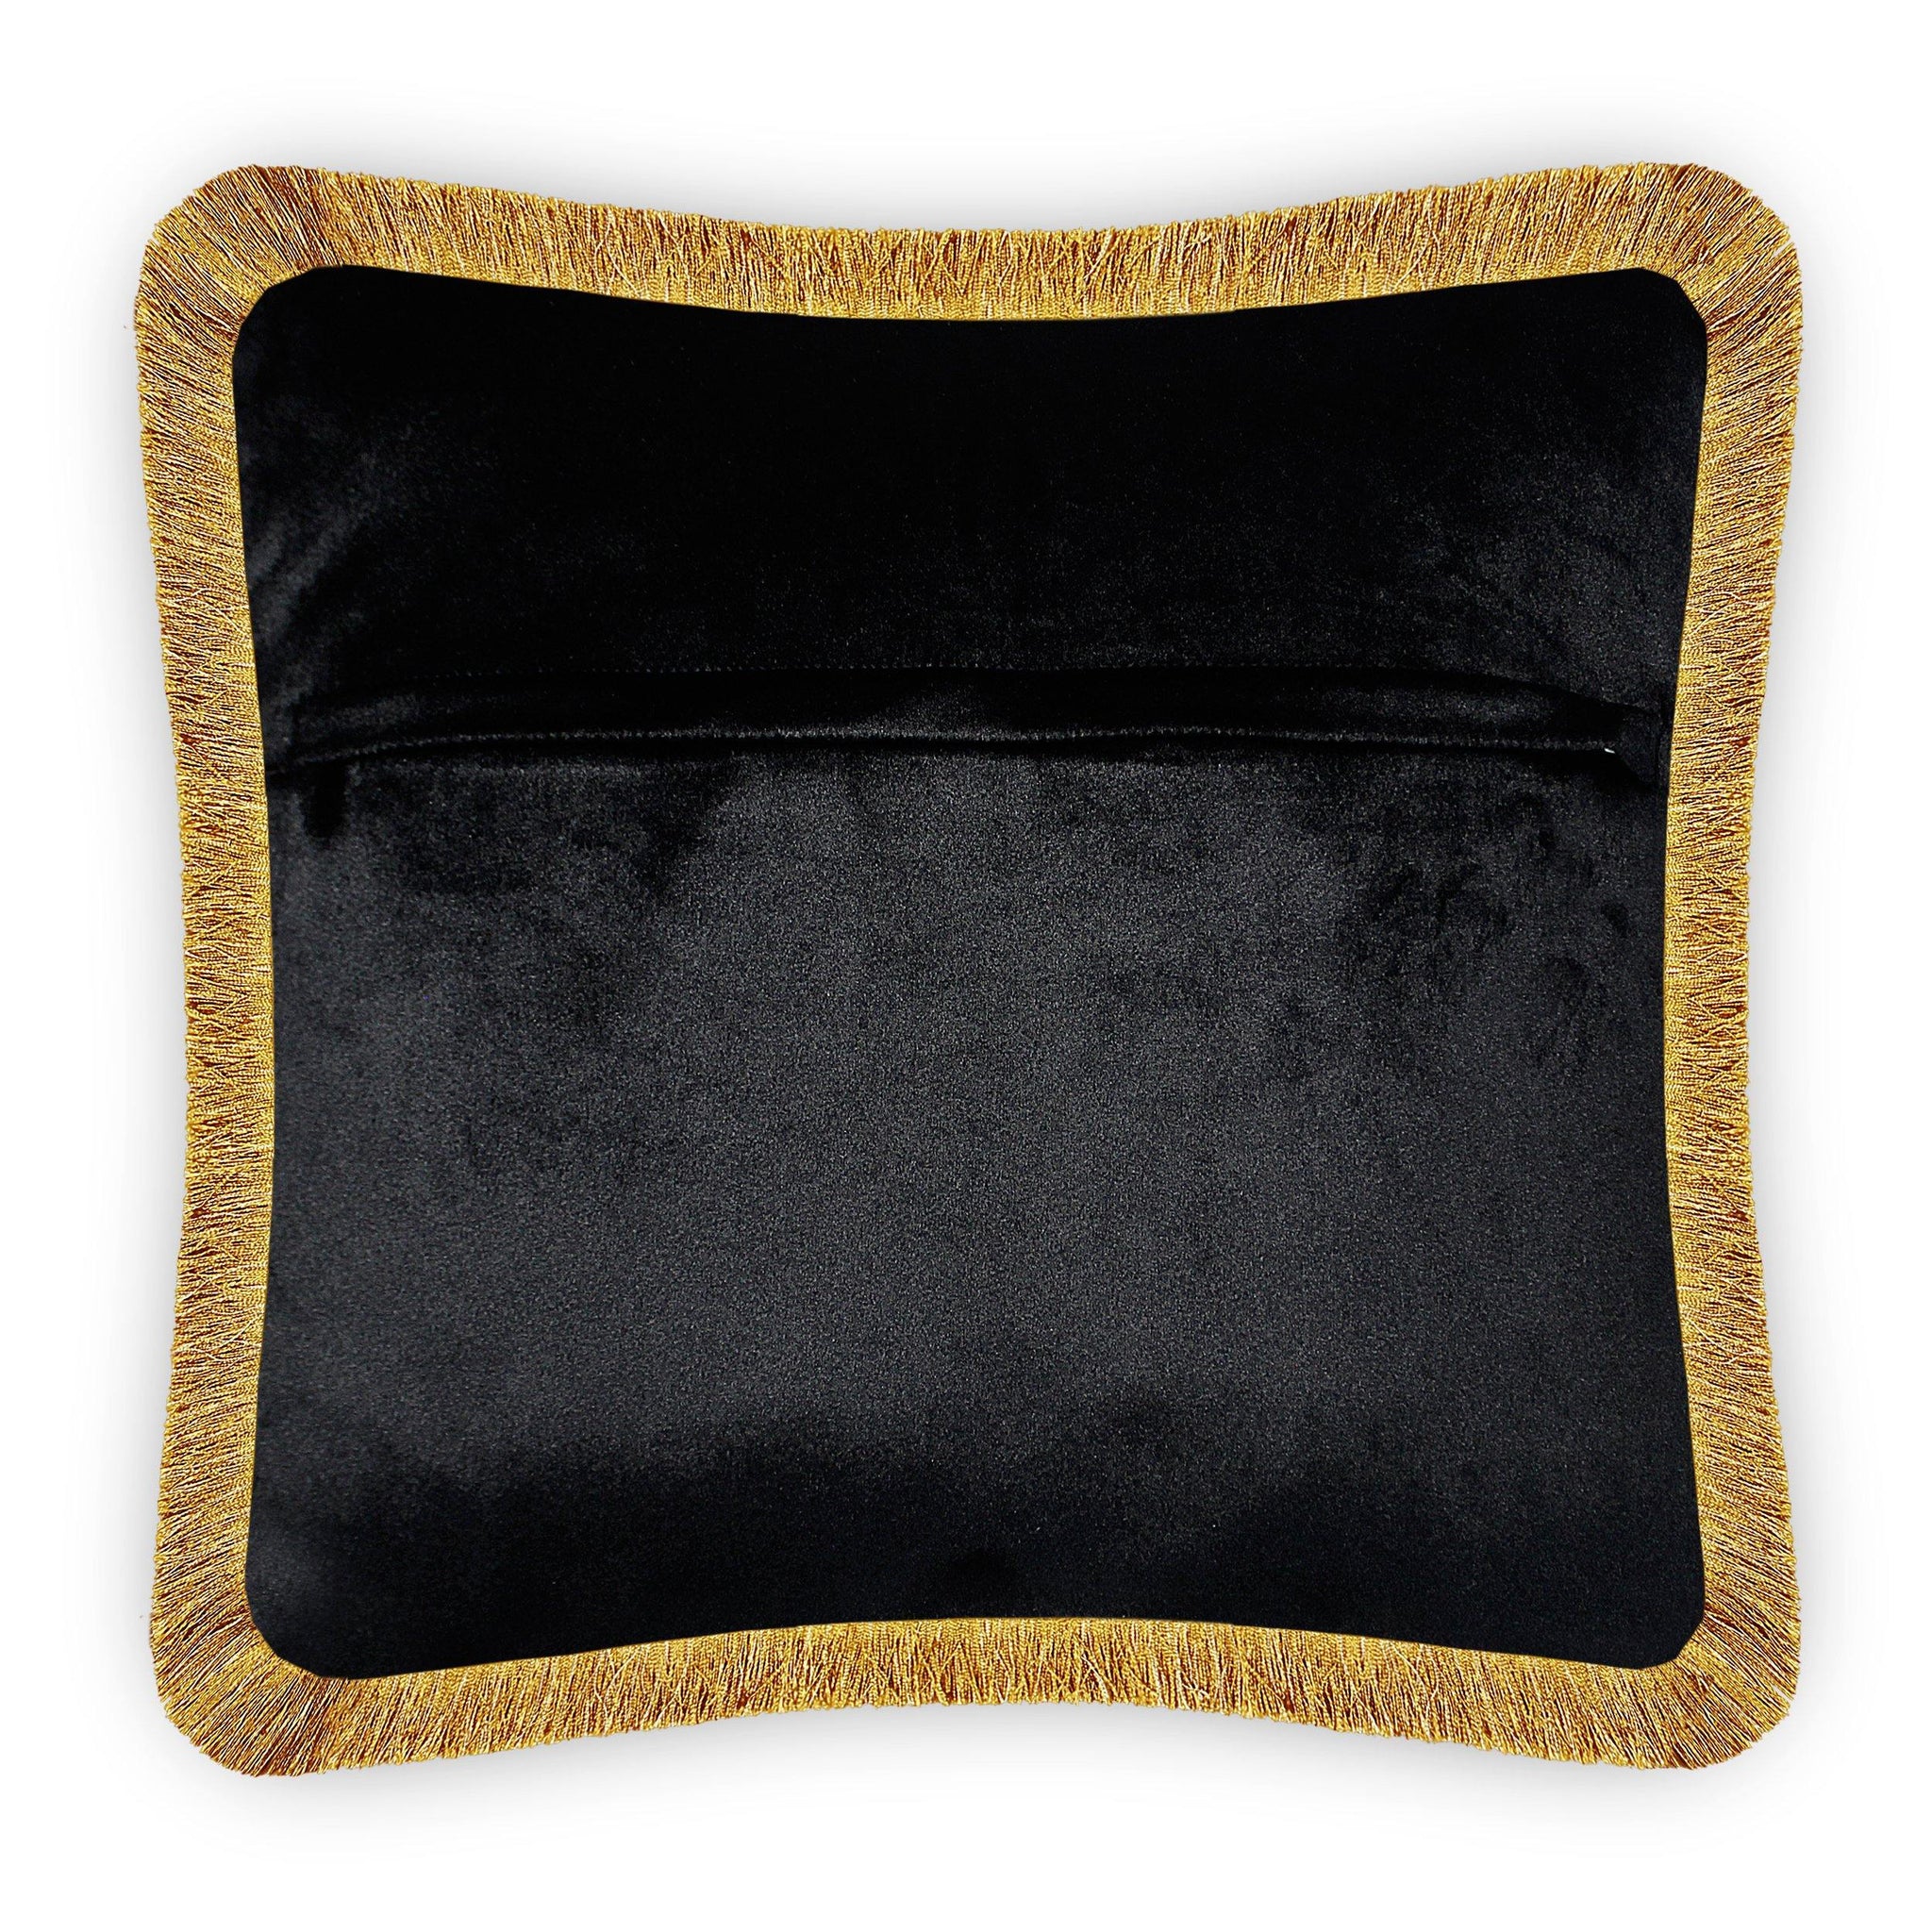 Black Velvet Cushion Cover Peacock Feather Decorative Pillowcase Home Decor Throw Pillow for Sofa Chair Couch Bedroom 45x45 cm 18x18 In